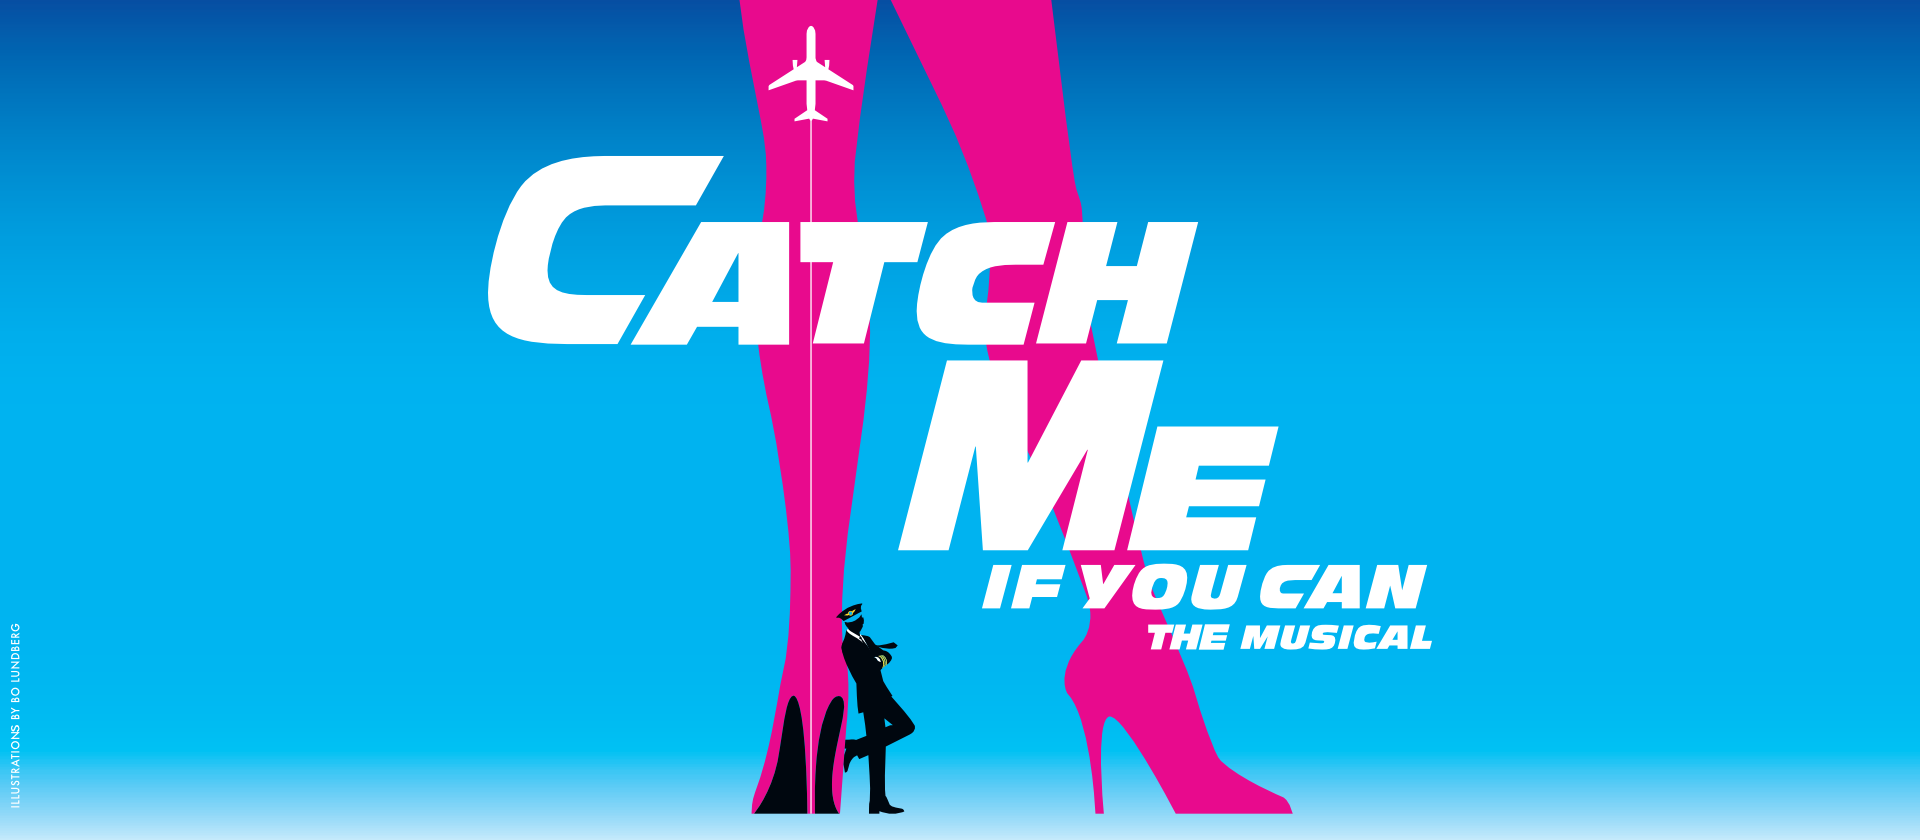 Catch Me If You Can - Das Musical